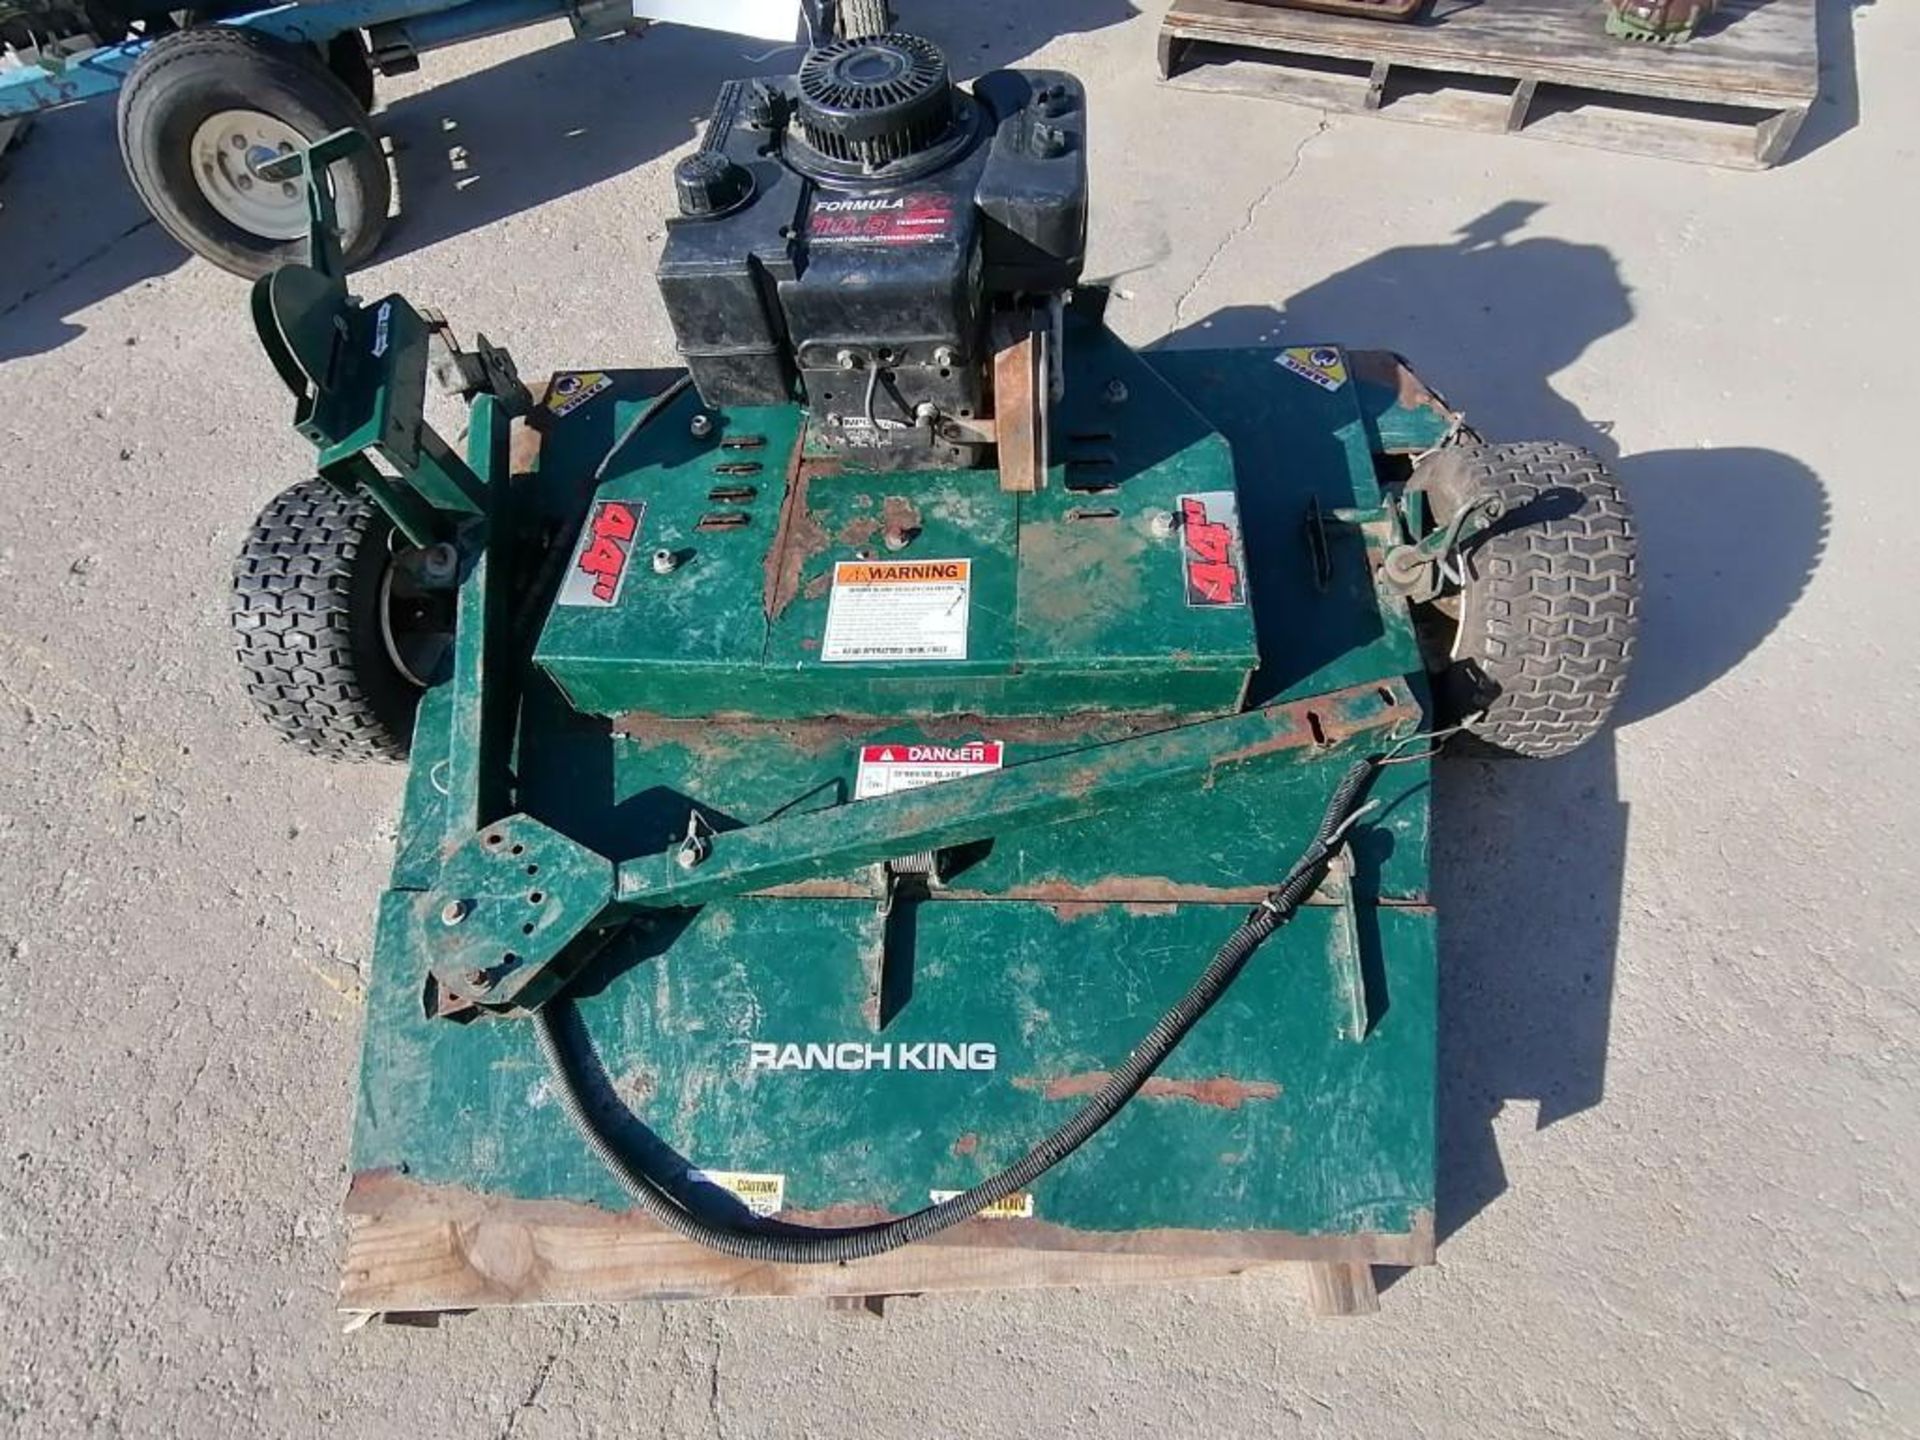 (1) 44" RanchKing Mower with 10.5 Tecumseh Engine. Located in Mt. Pleasant, IA.